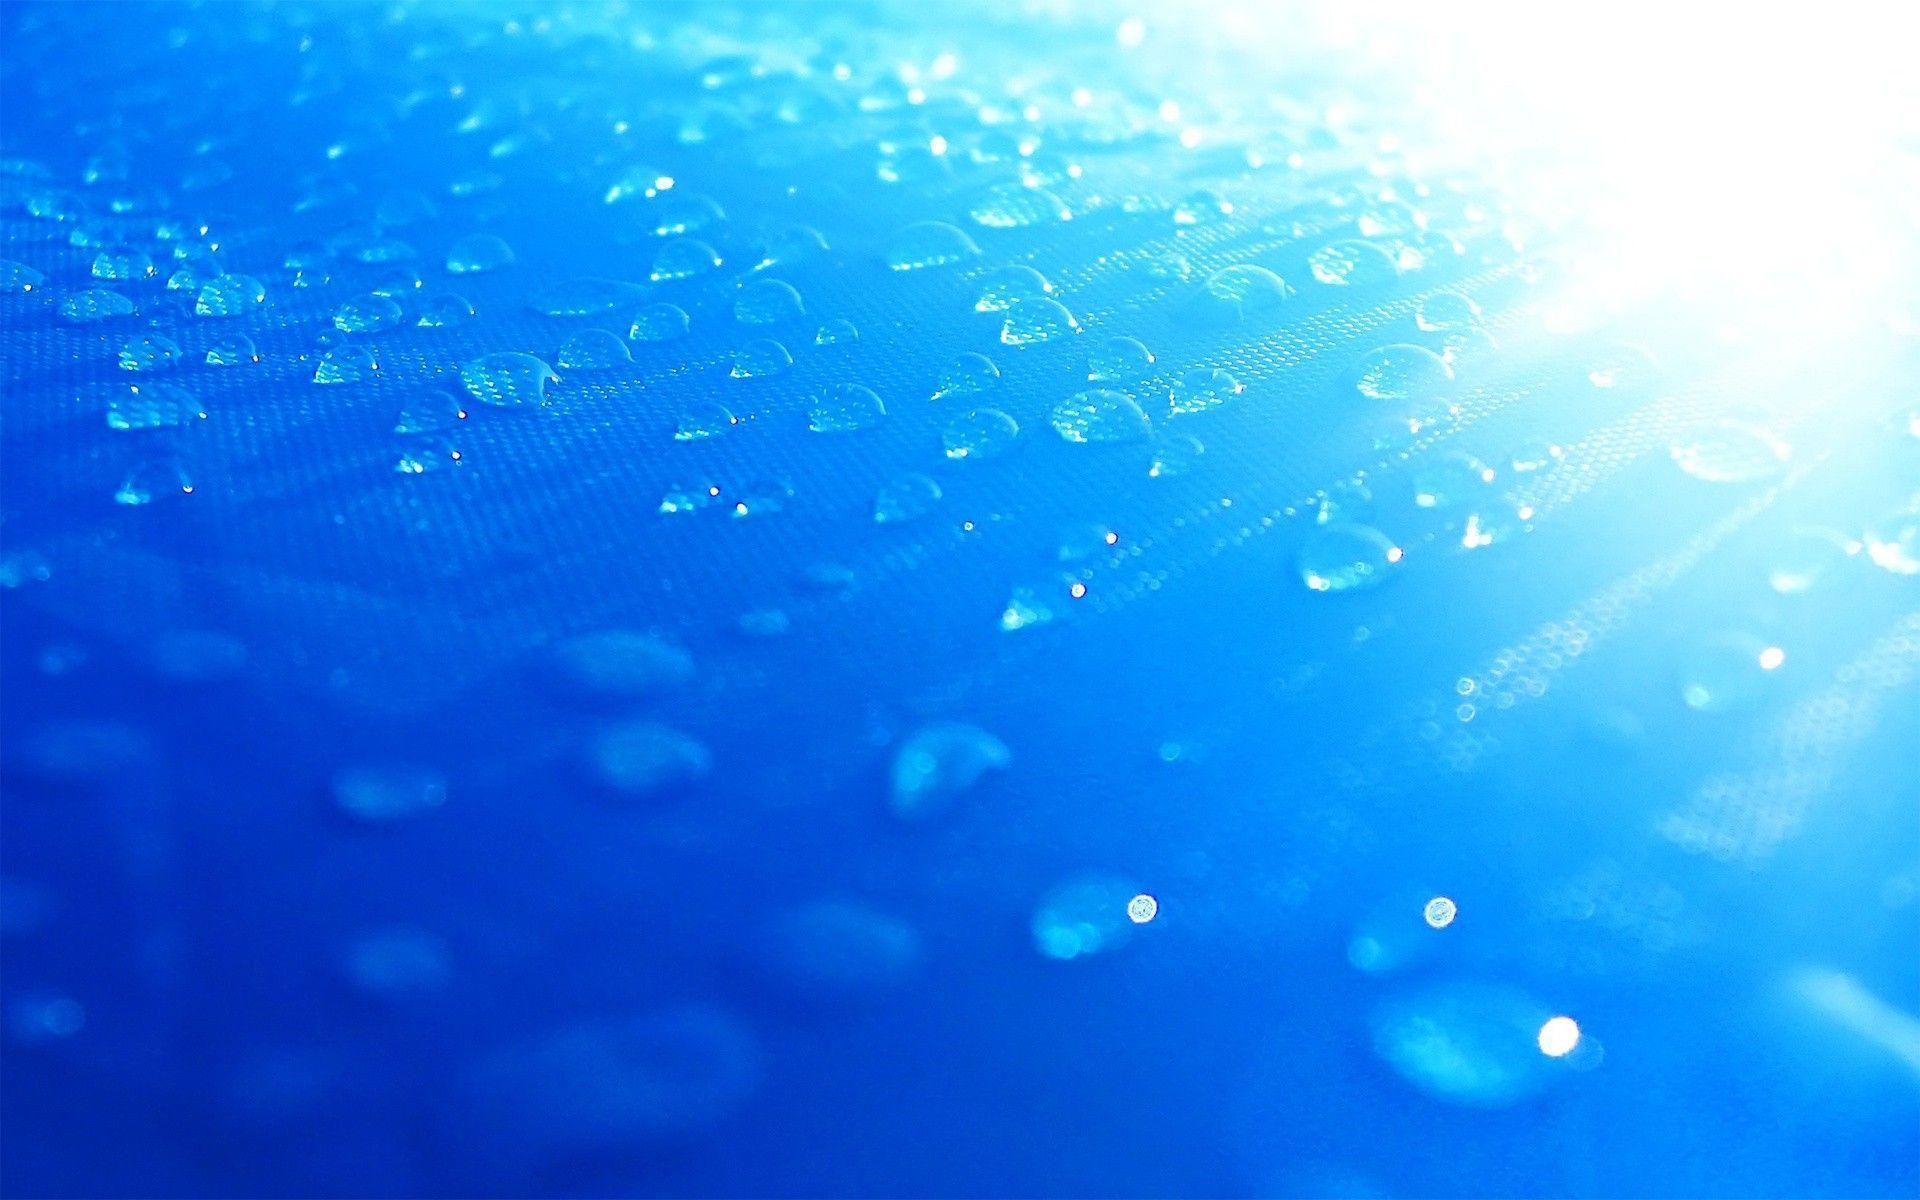 Free Download Water Drops Blue Background Wallpaper in 1920x1200